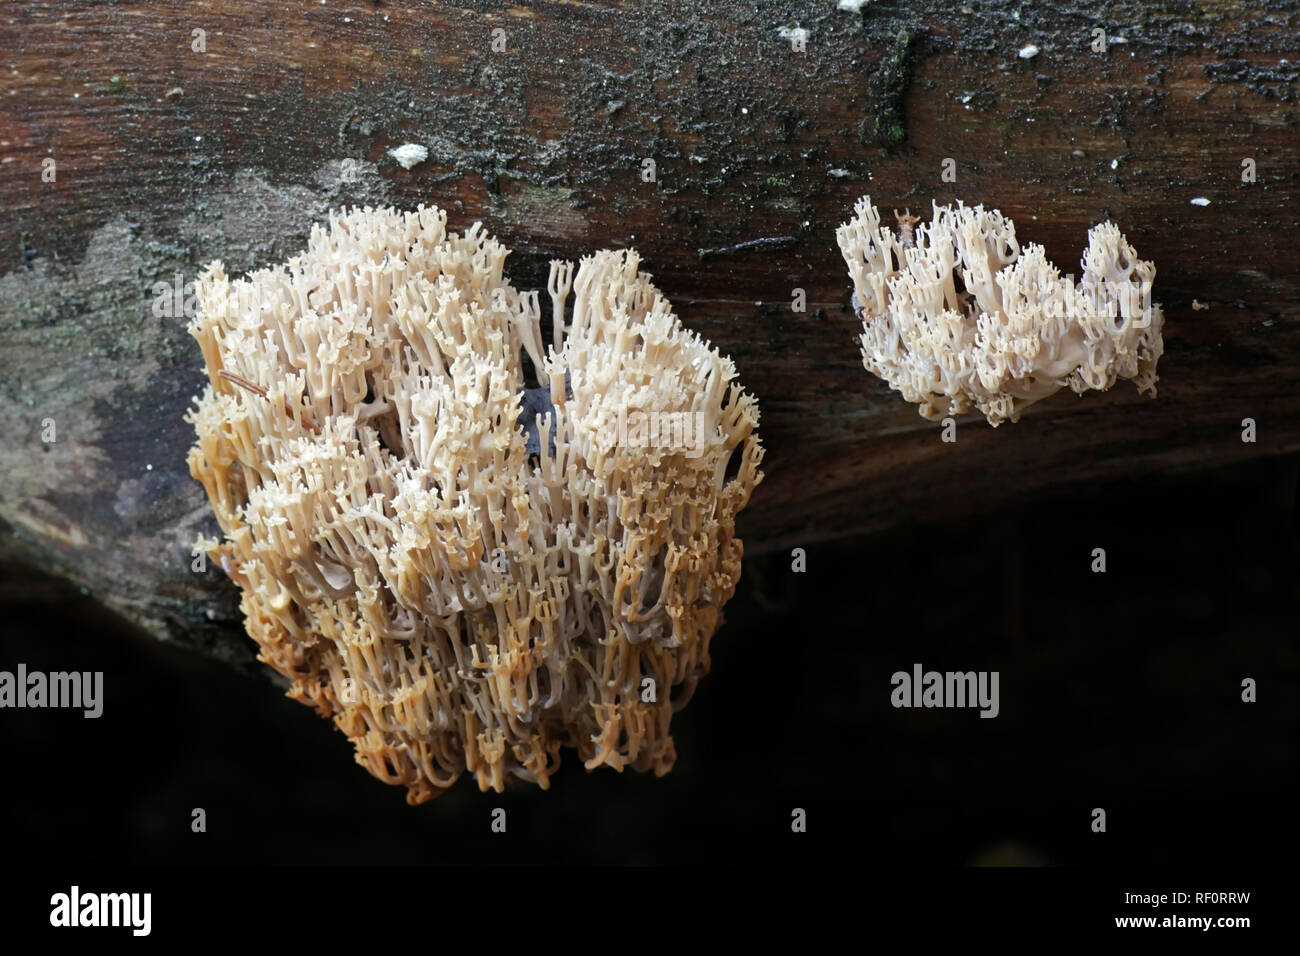 Artomyces pyxidatus, a coral fungus that is commonly called crown coral or crown-tipped coral fungus Stock Photo